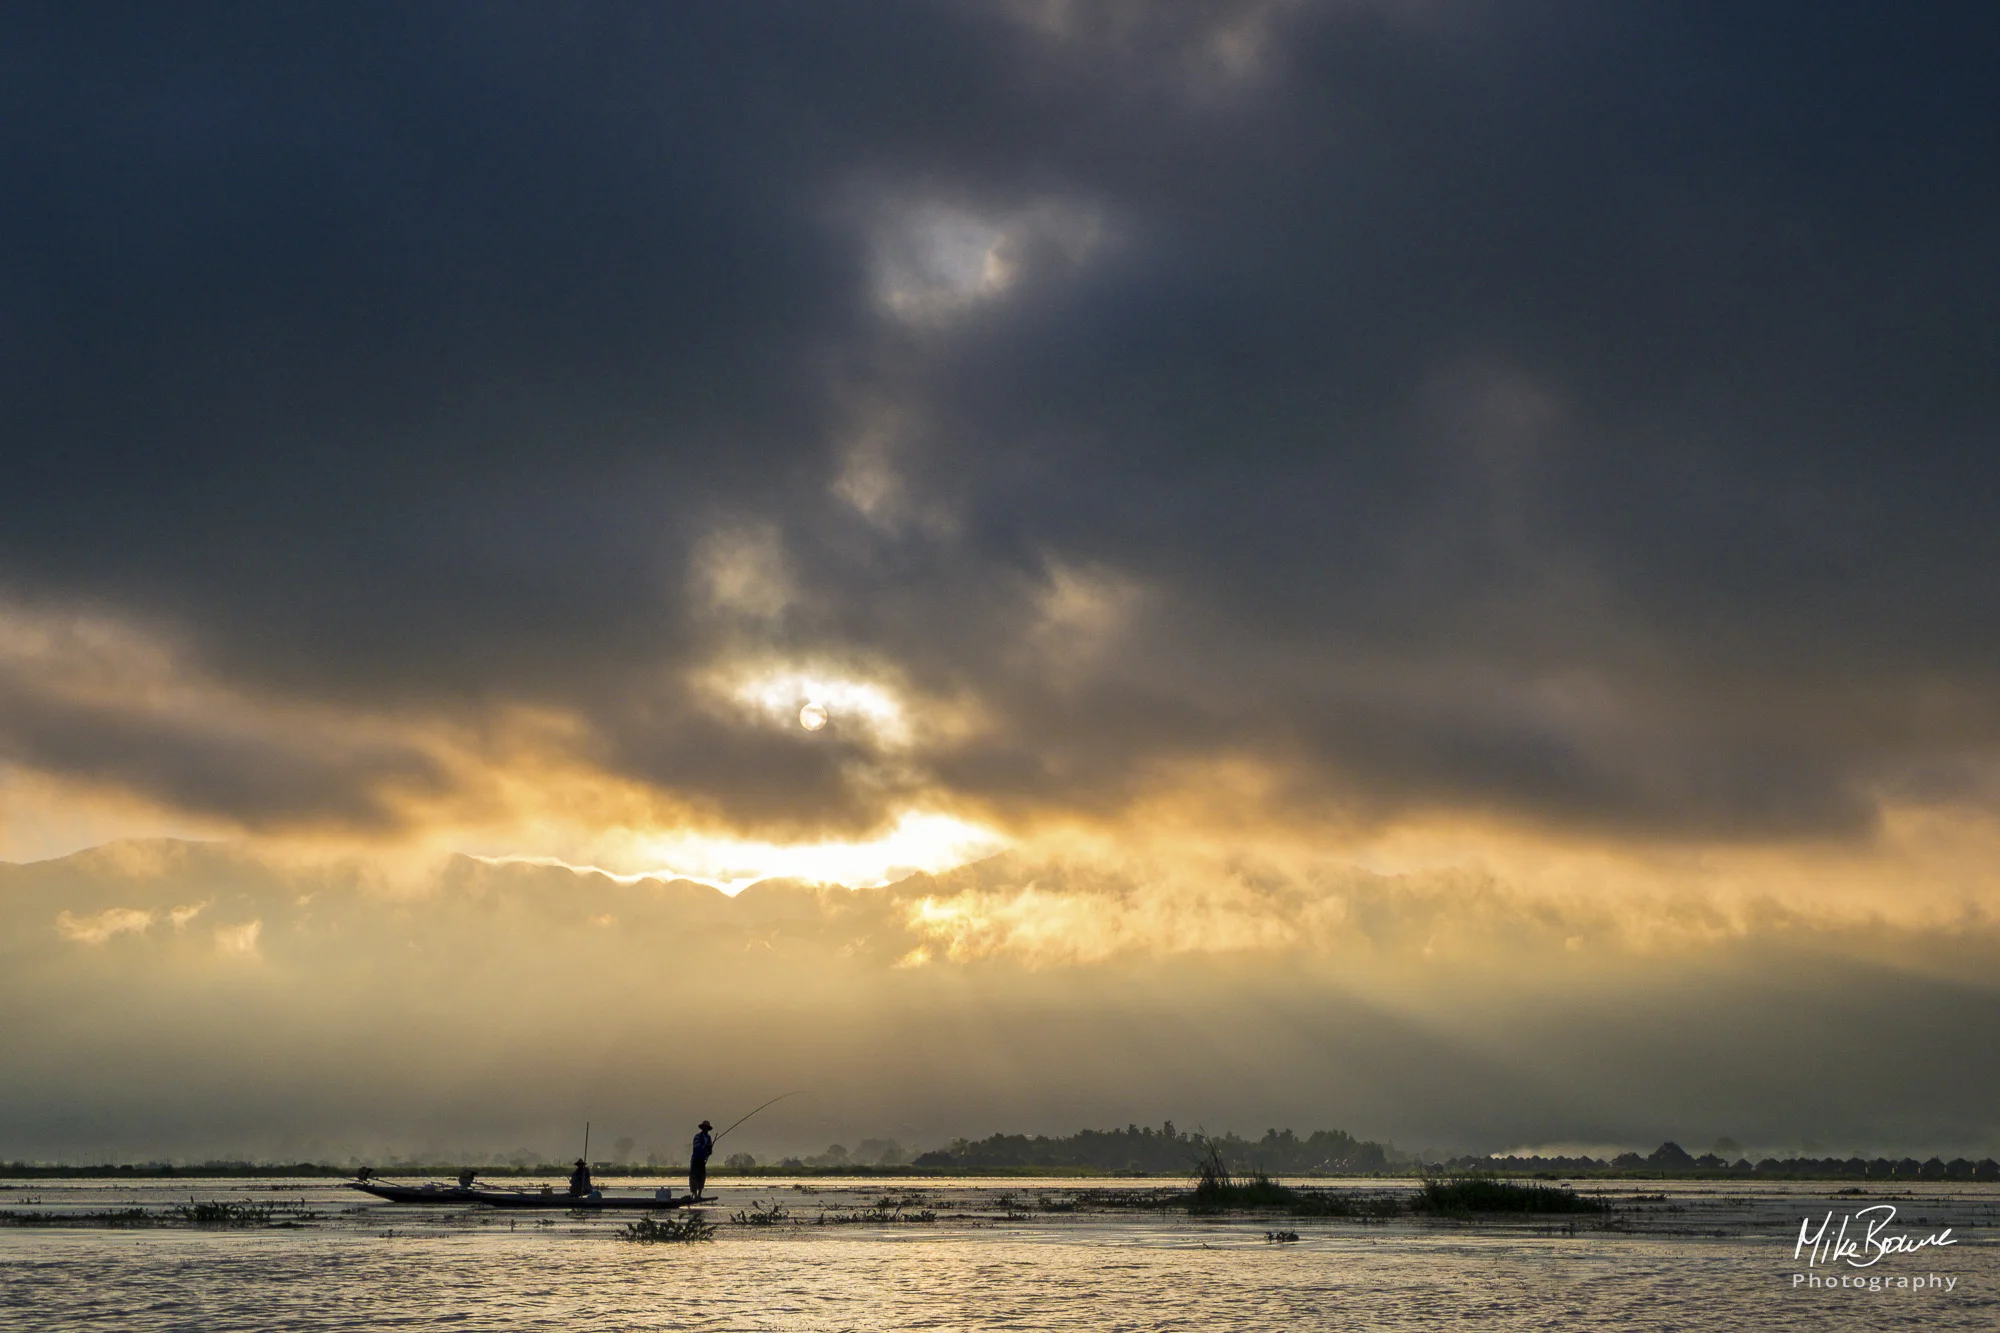 Two fishermen in small boat on Inle Lake, Myanmar and heavy storm clouds approaching from behind